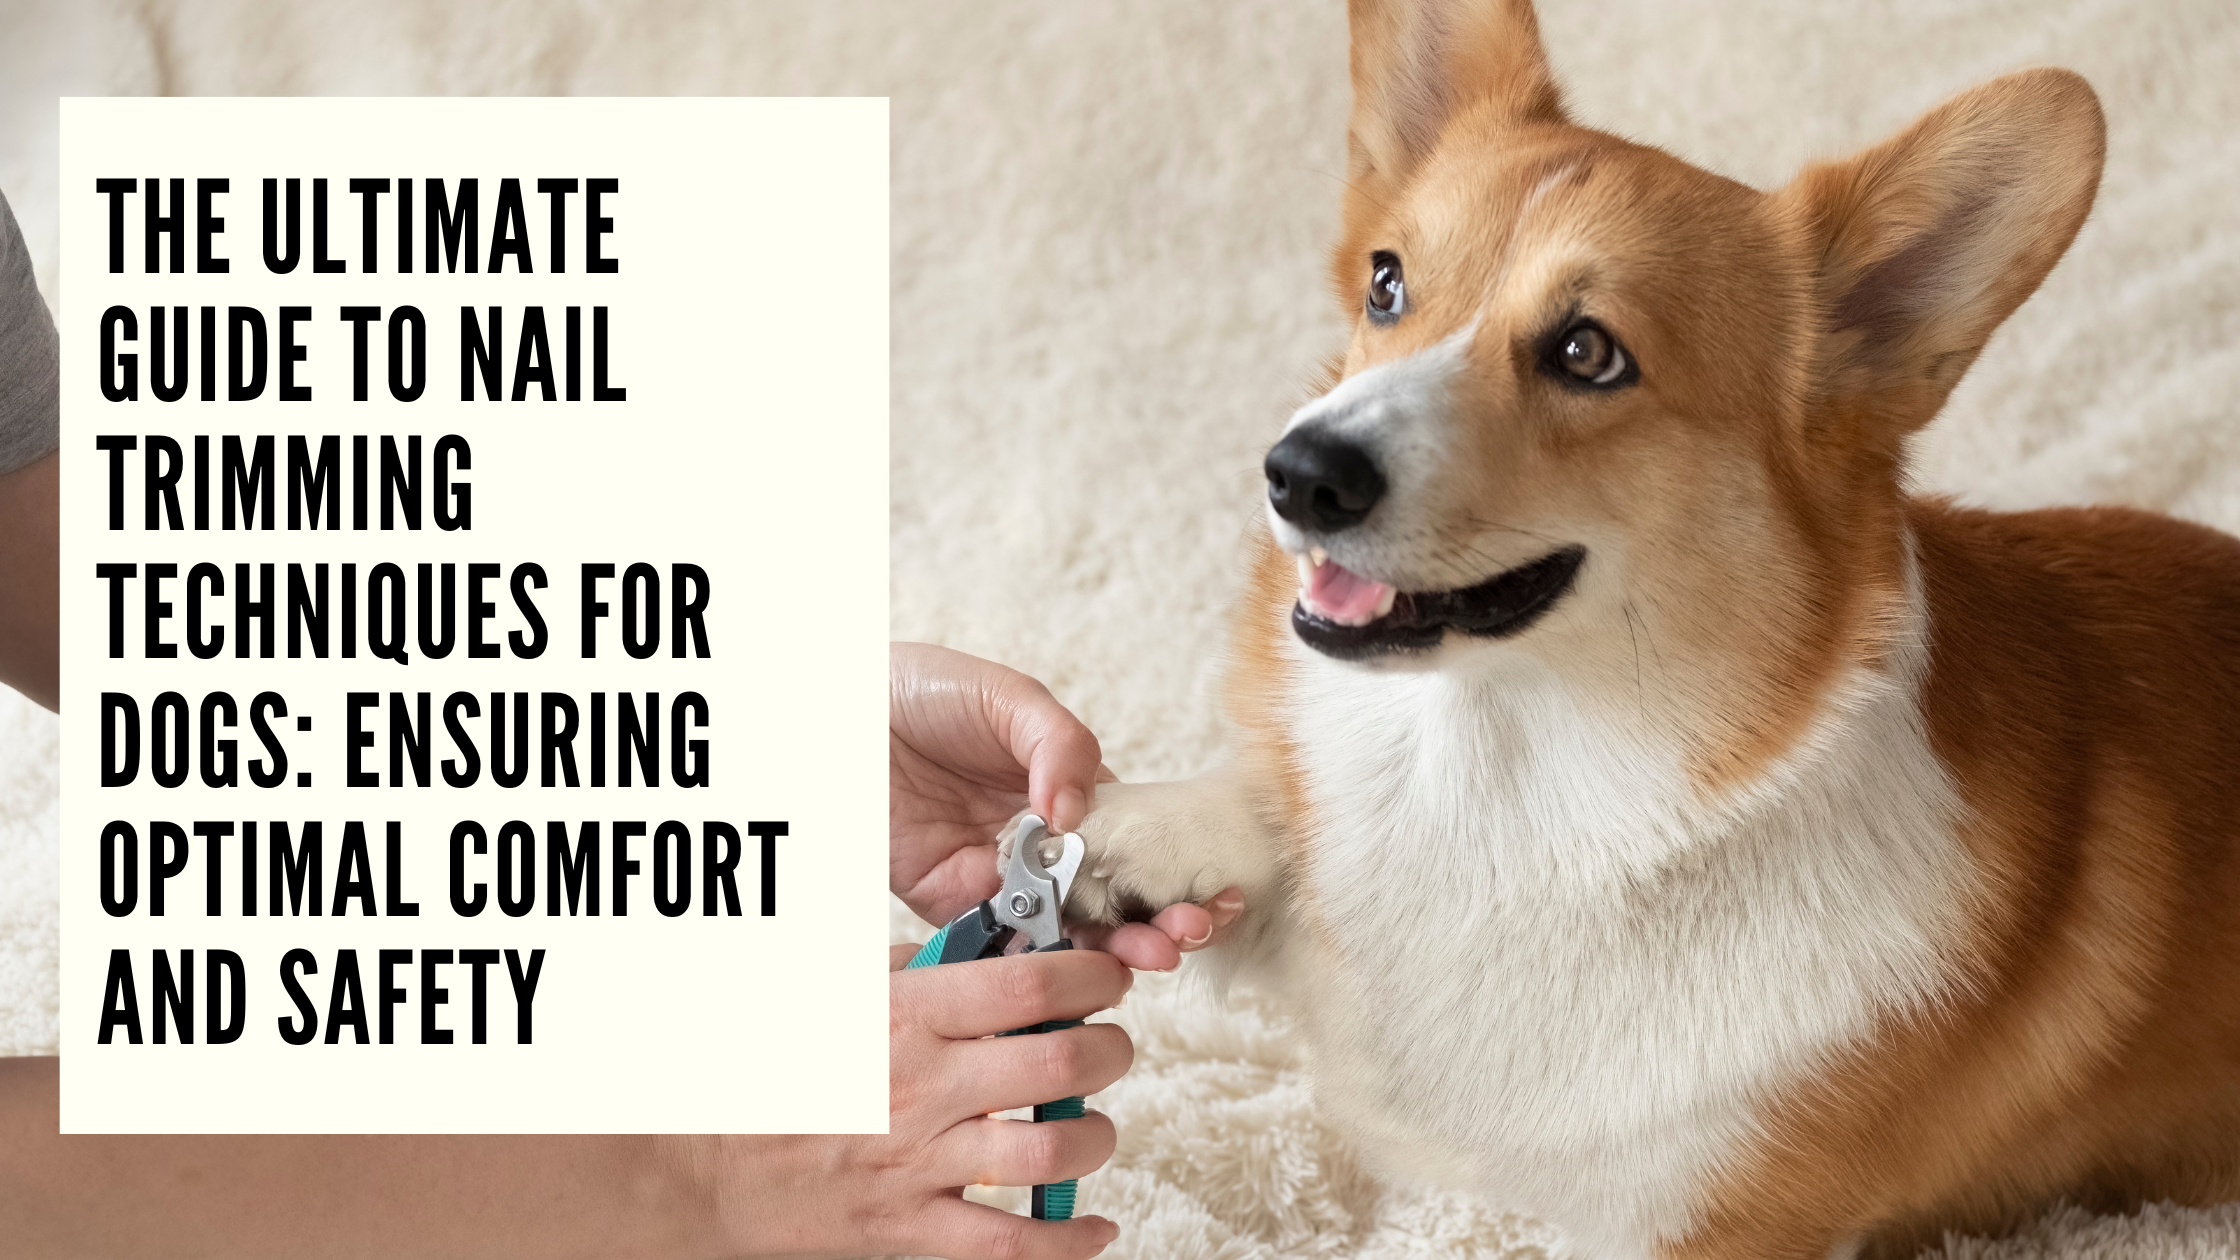 The Ultimate Guide to Nail Trimming Techniques for Dogs Ensuring Optimal Comfort and Safety